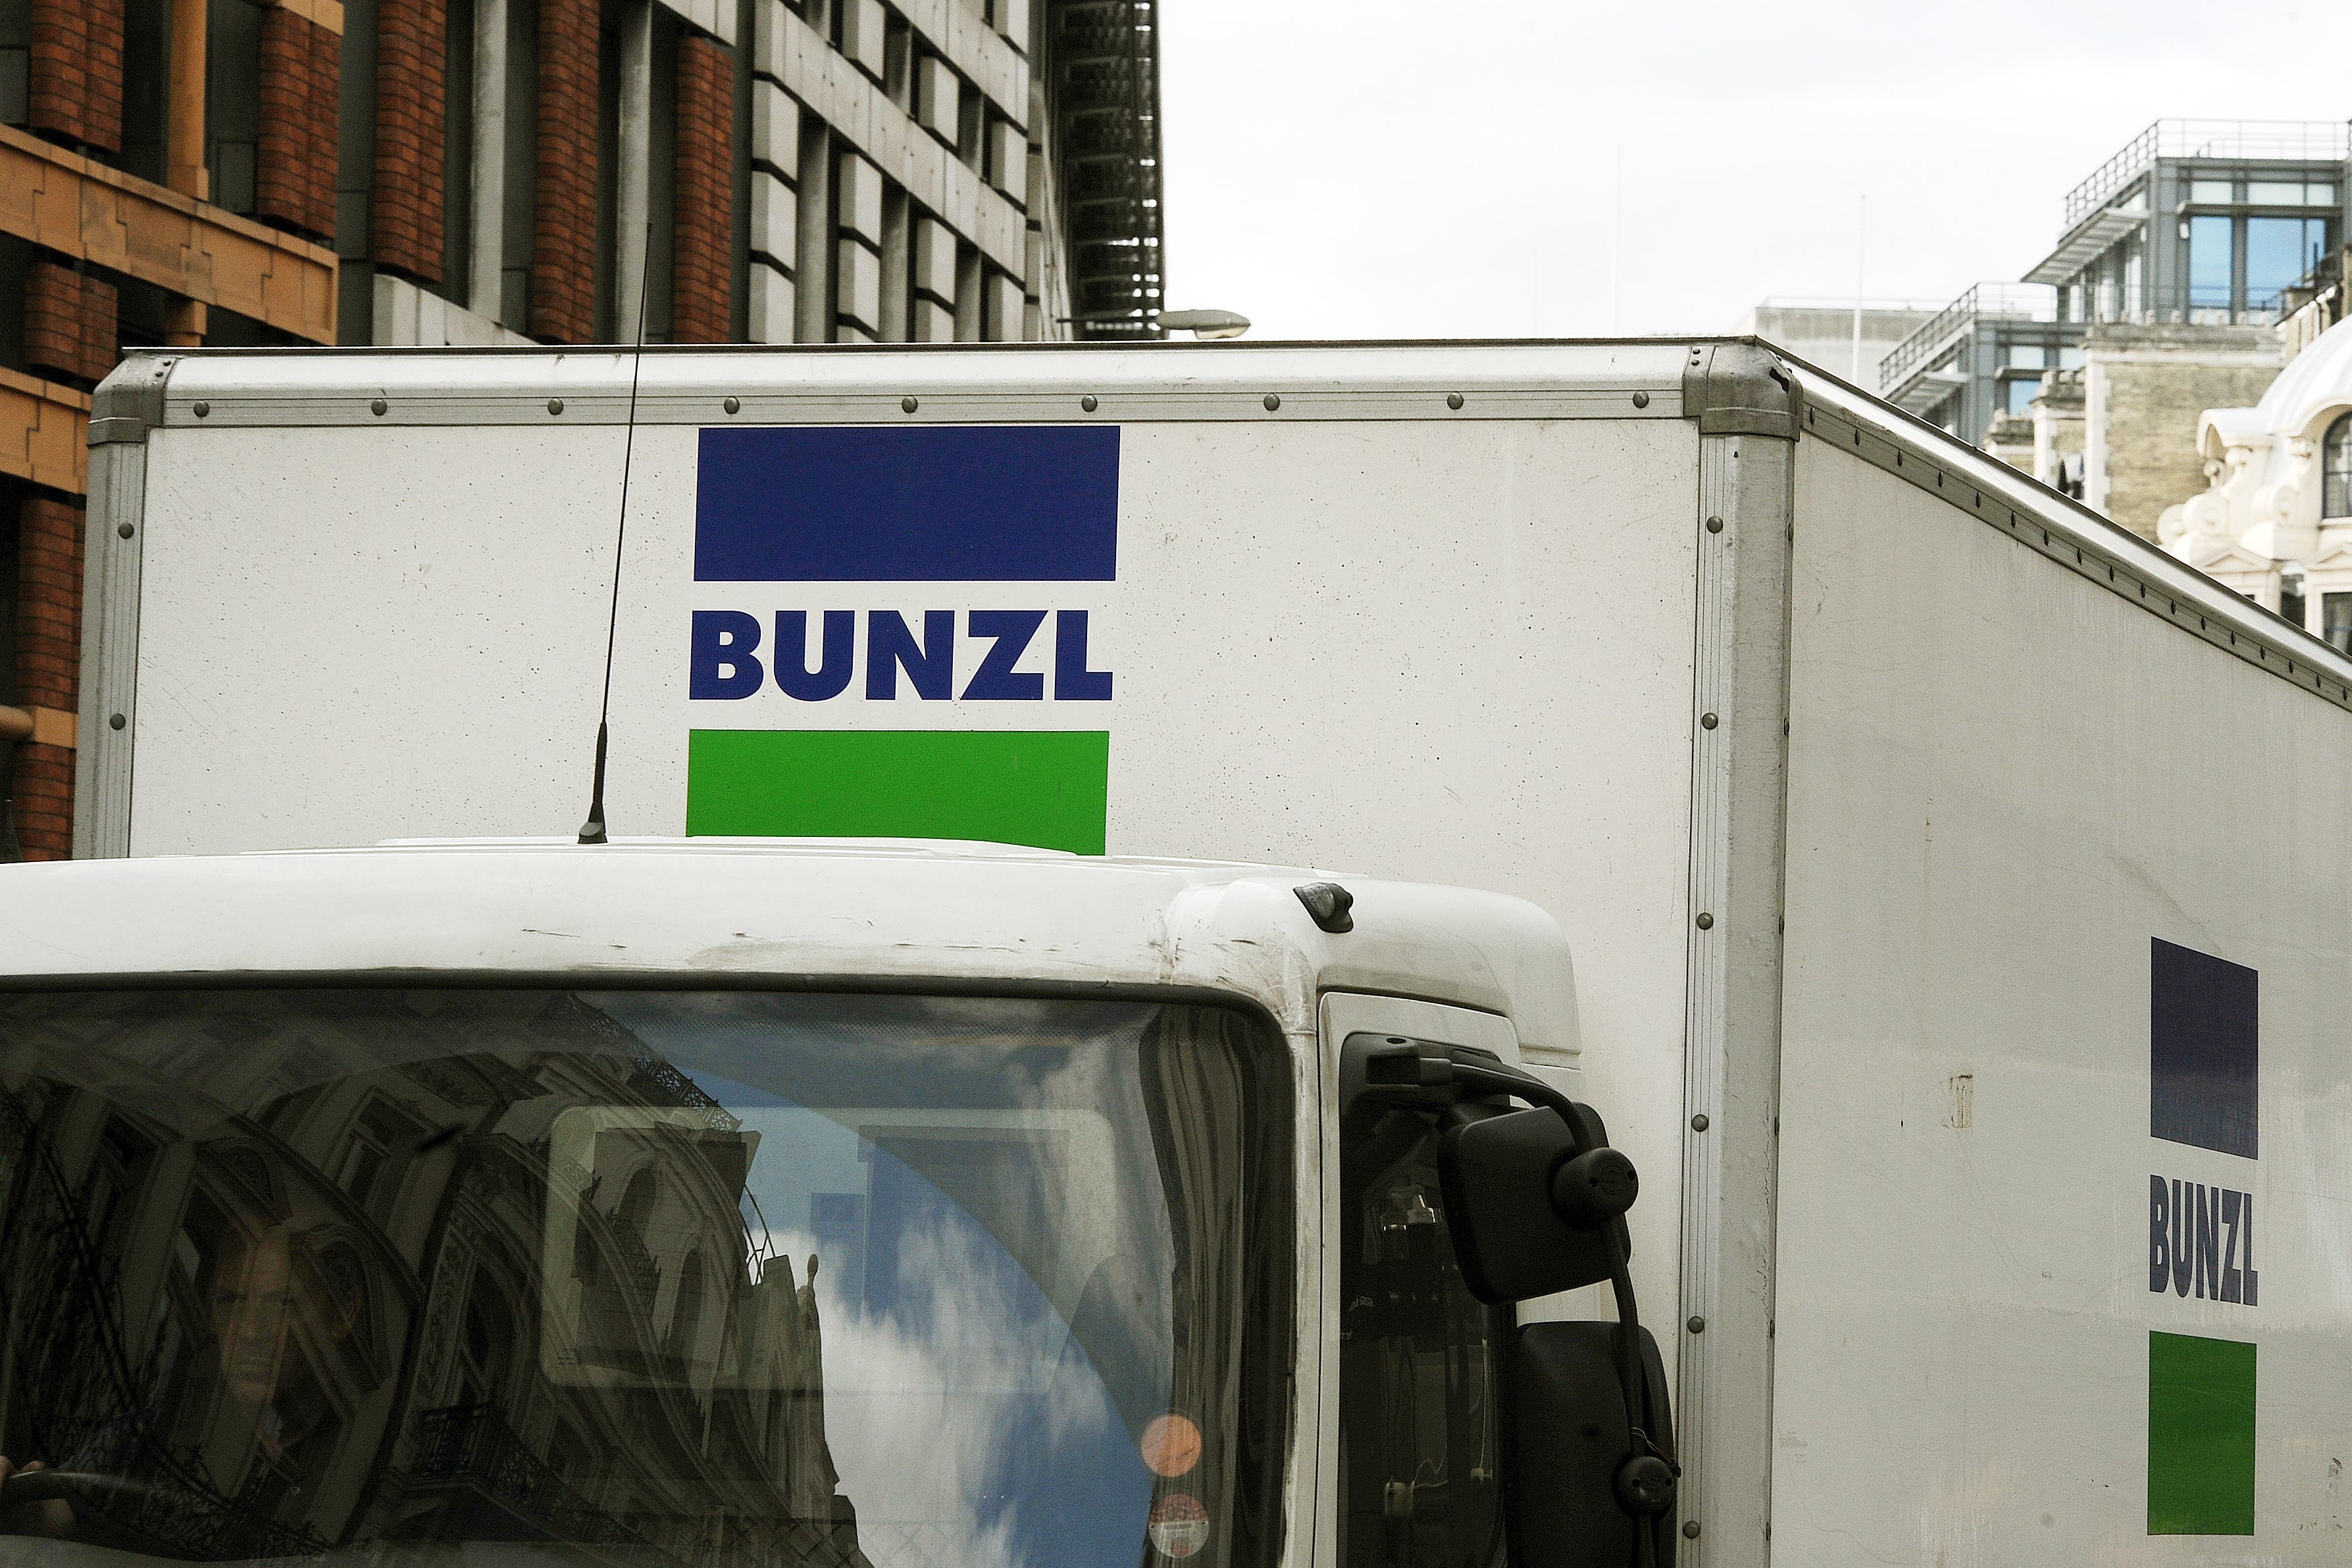 Distribution and outsourcing group Bunzl has increased its full-year earnings guidance as cost pressures ease and thanks to self-help action to boost profitability (John Stillwell/PA)